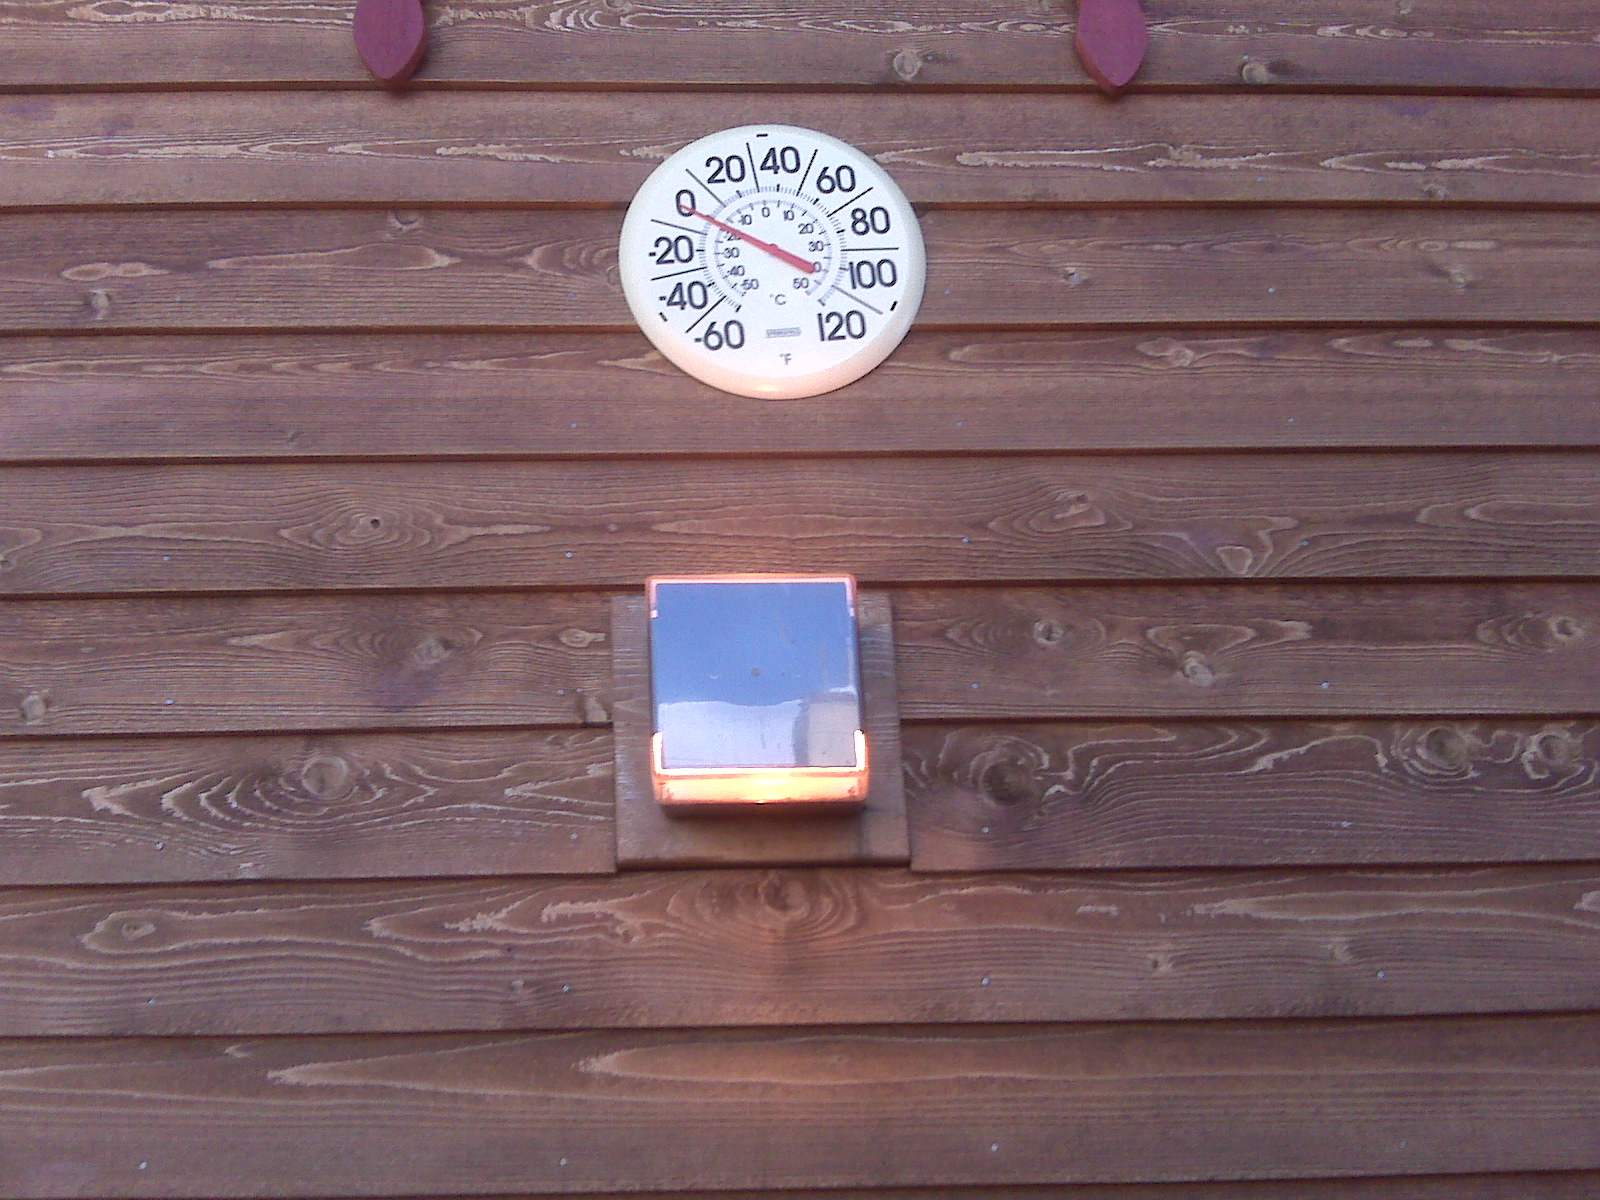 Thermometer, -20C/0F, Summit Chalet on Moose Mountain, MN